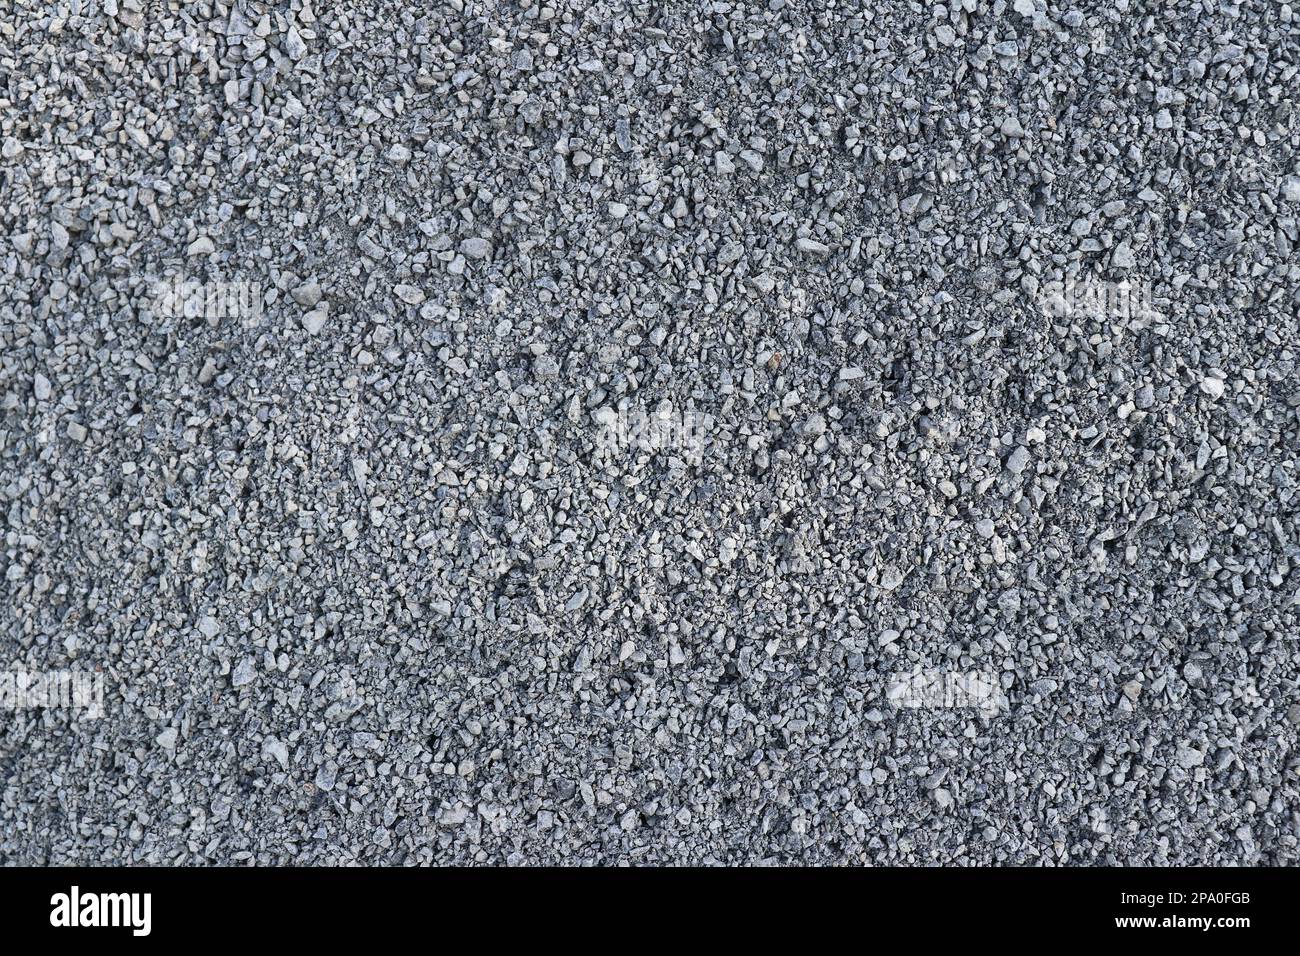 Fine to medium coarse gravel - texture of the road surface Stock Photo